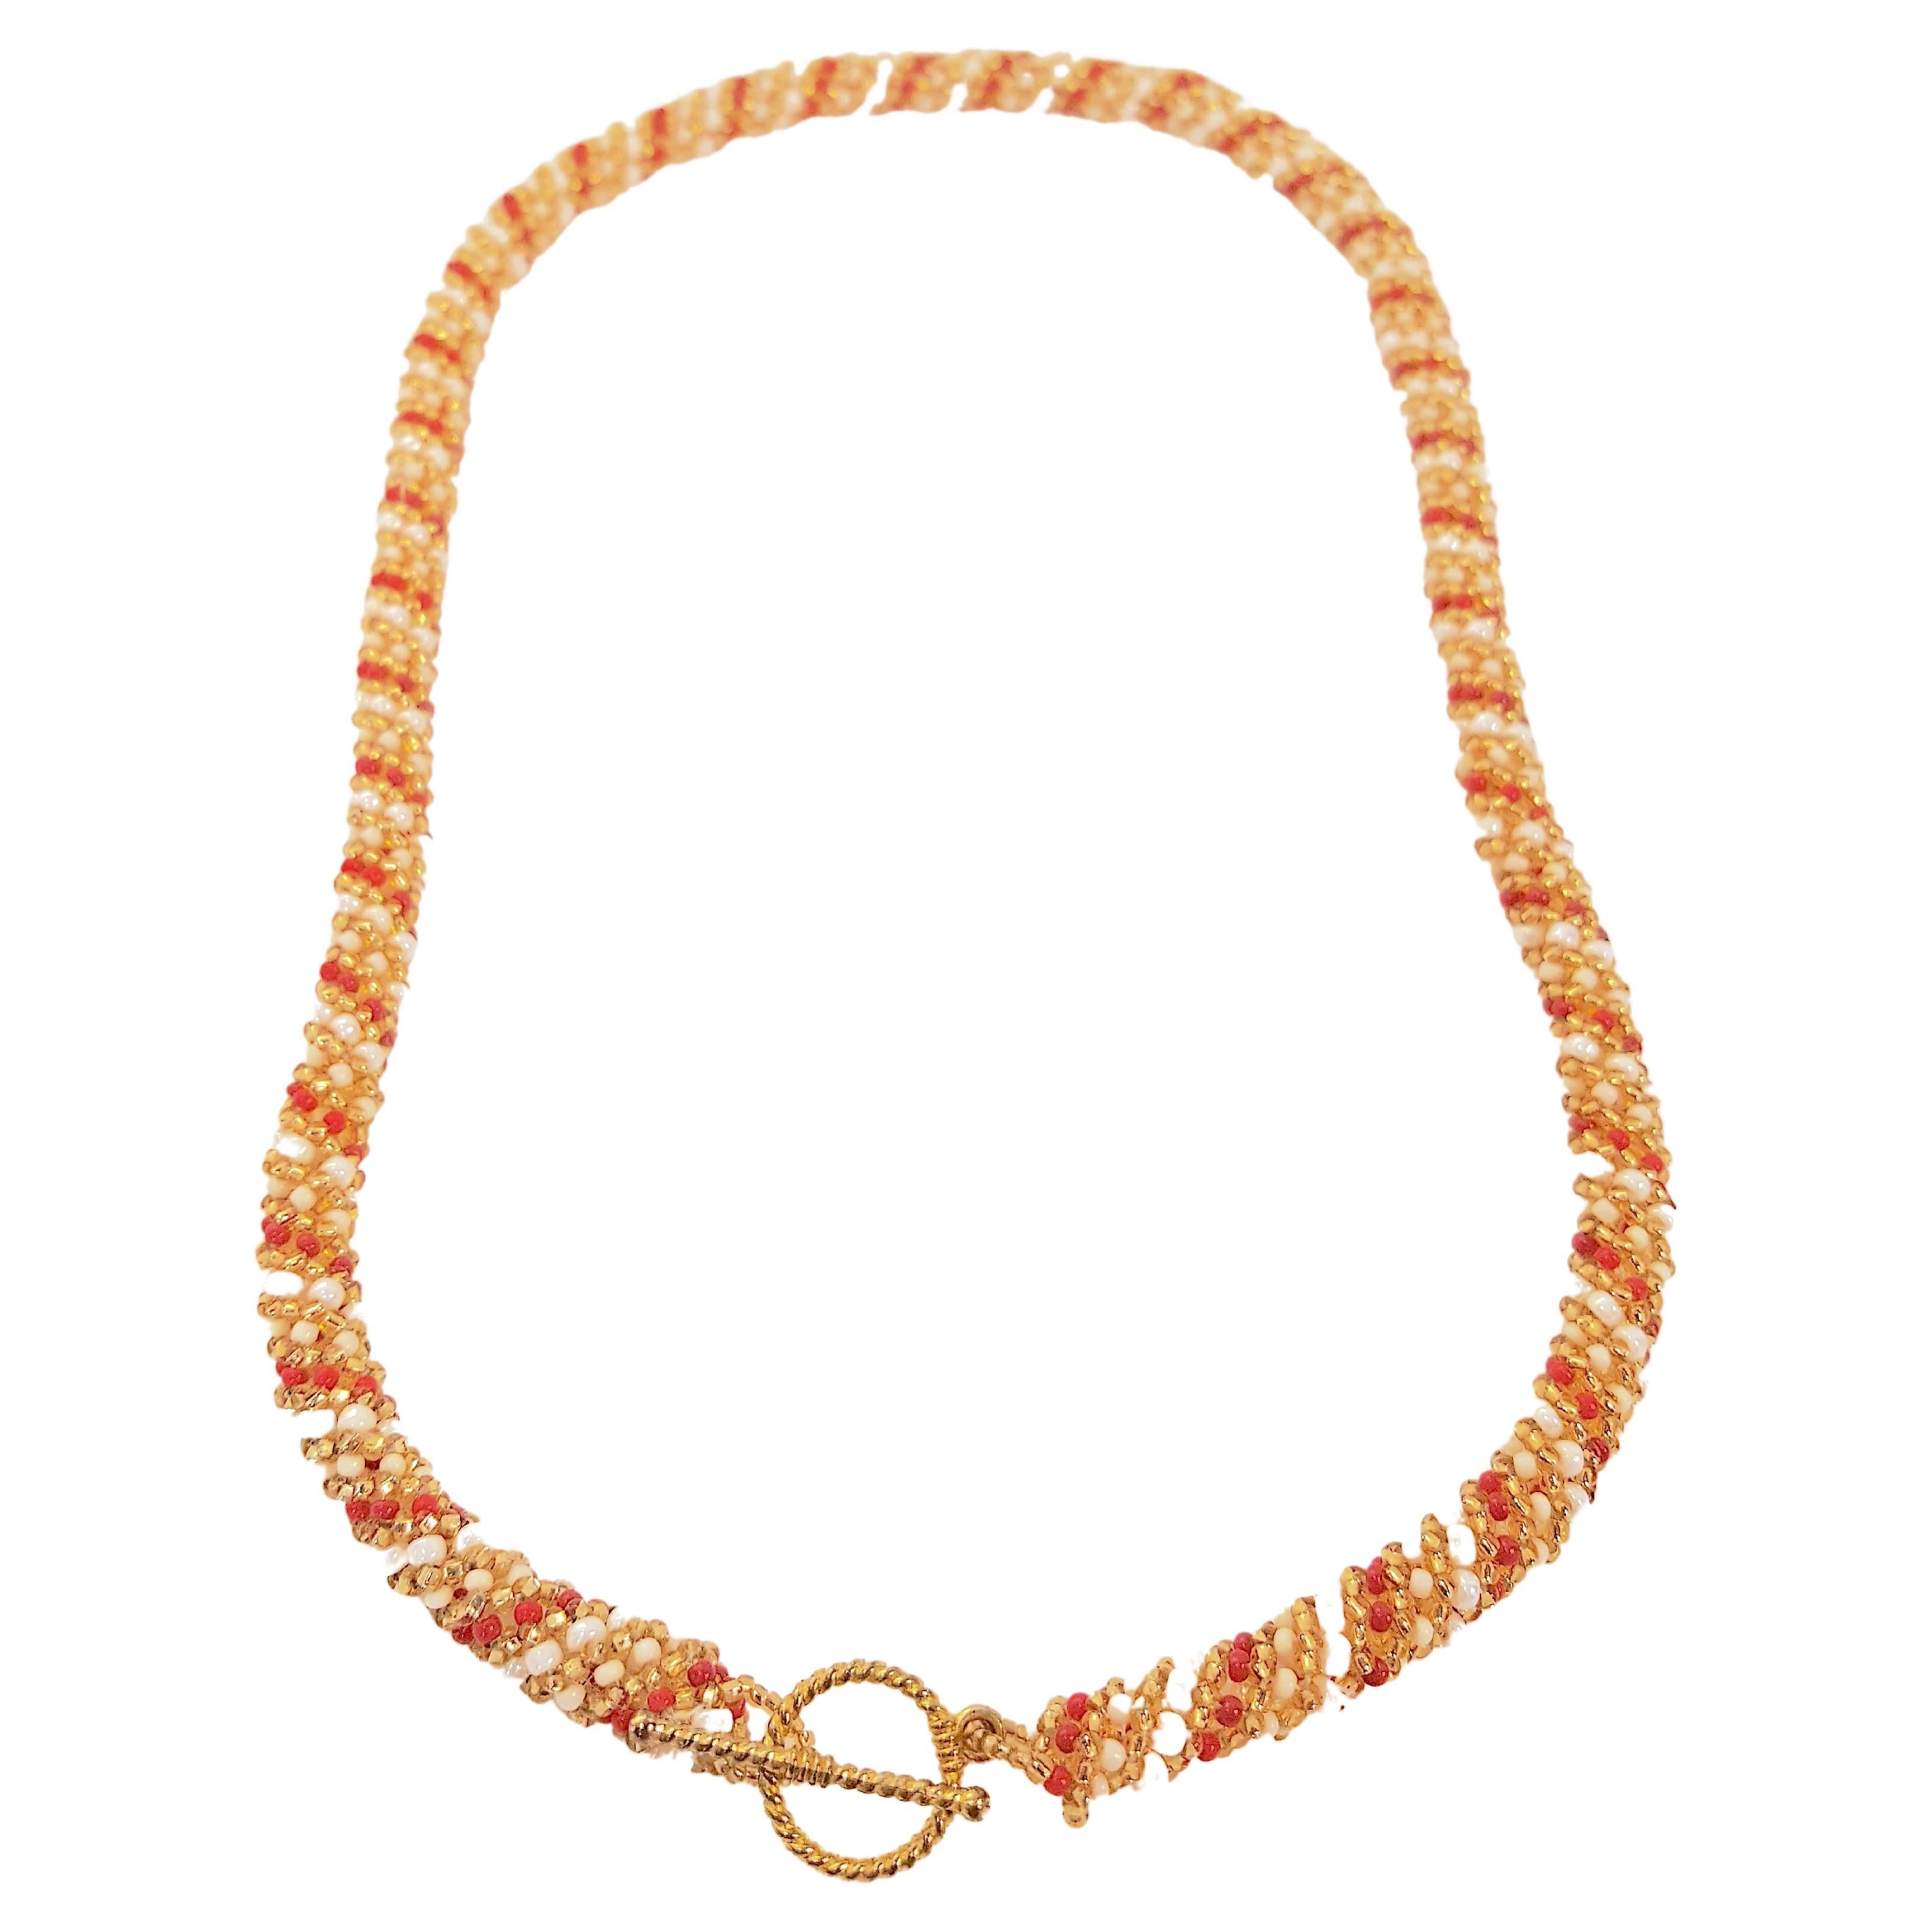 Couture 1930s ChanelRousseletStyle GlassGold FauxCarnelianPearl Torsade Necklace For Sale